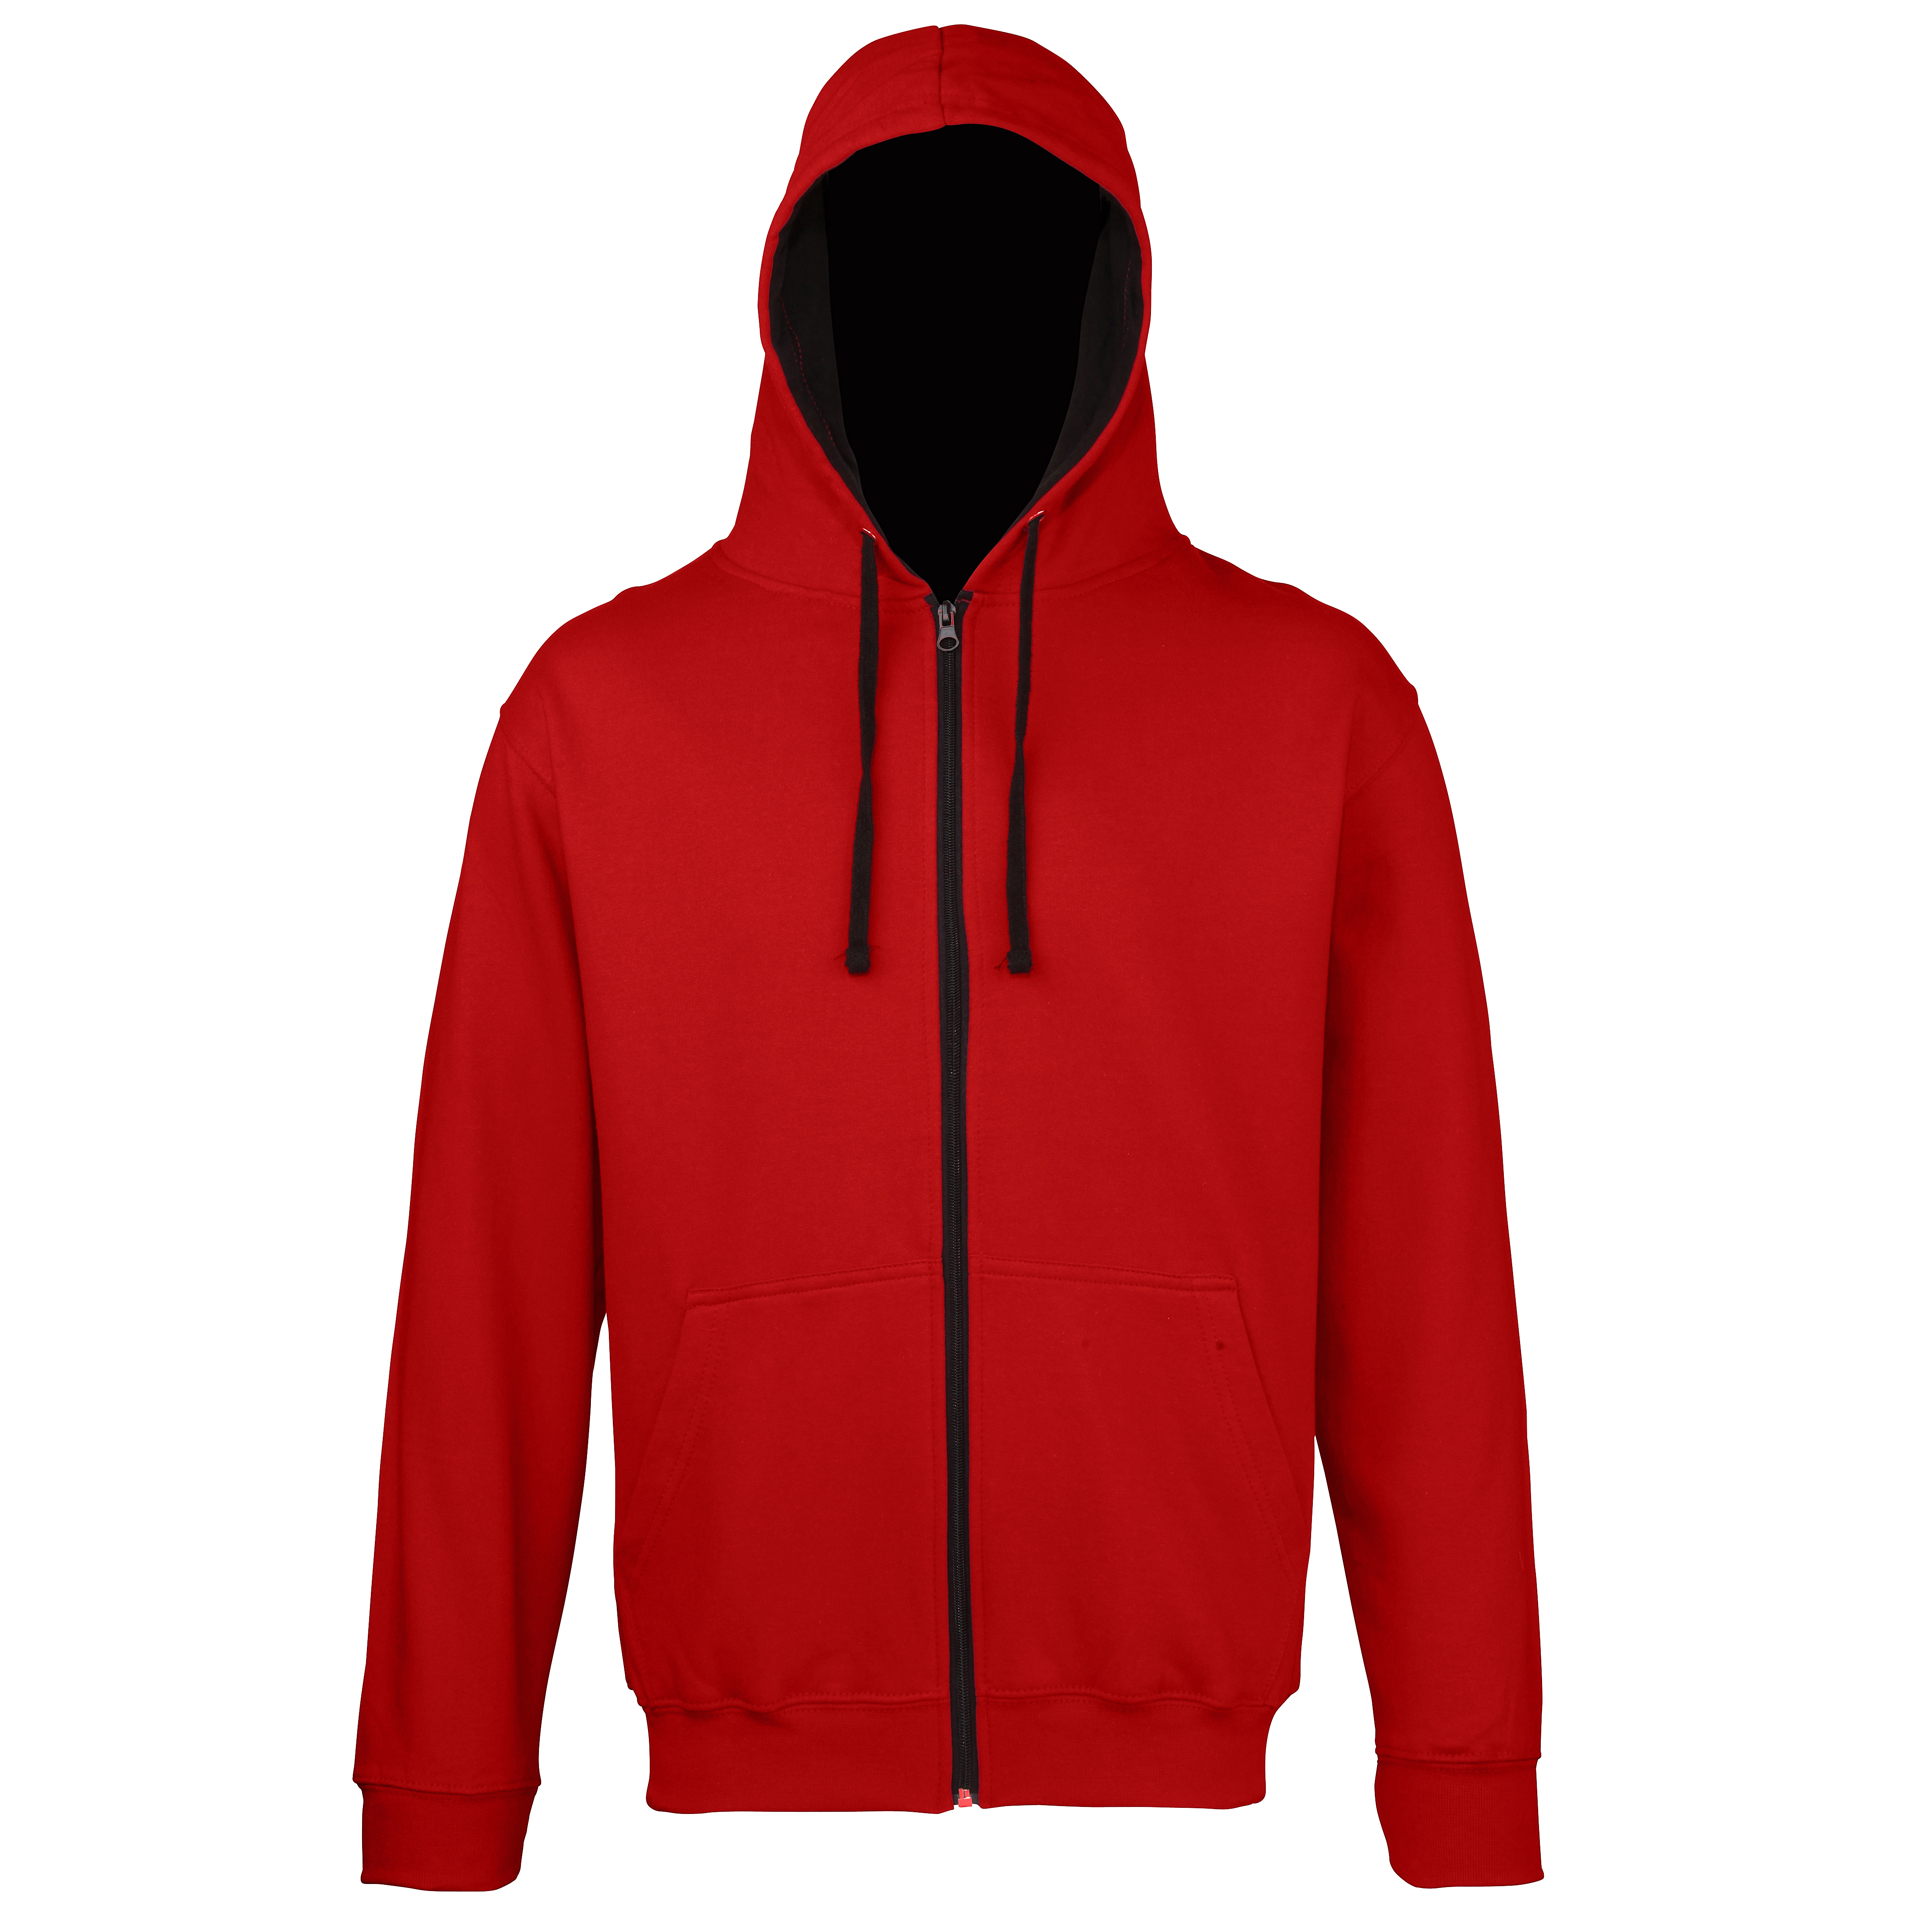 Men's Varsity Hoodie in red with black details and lining